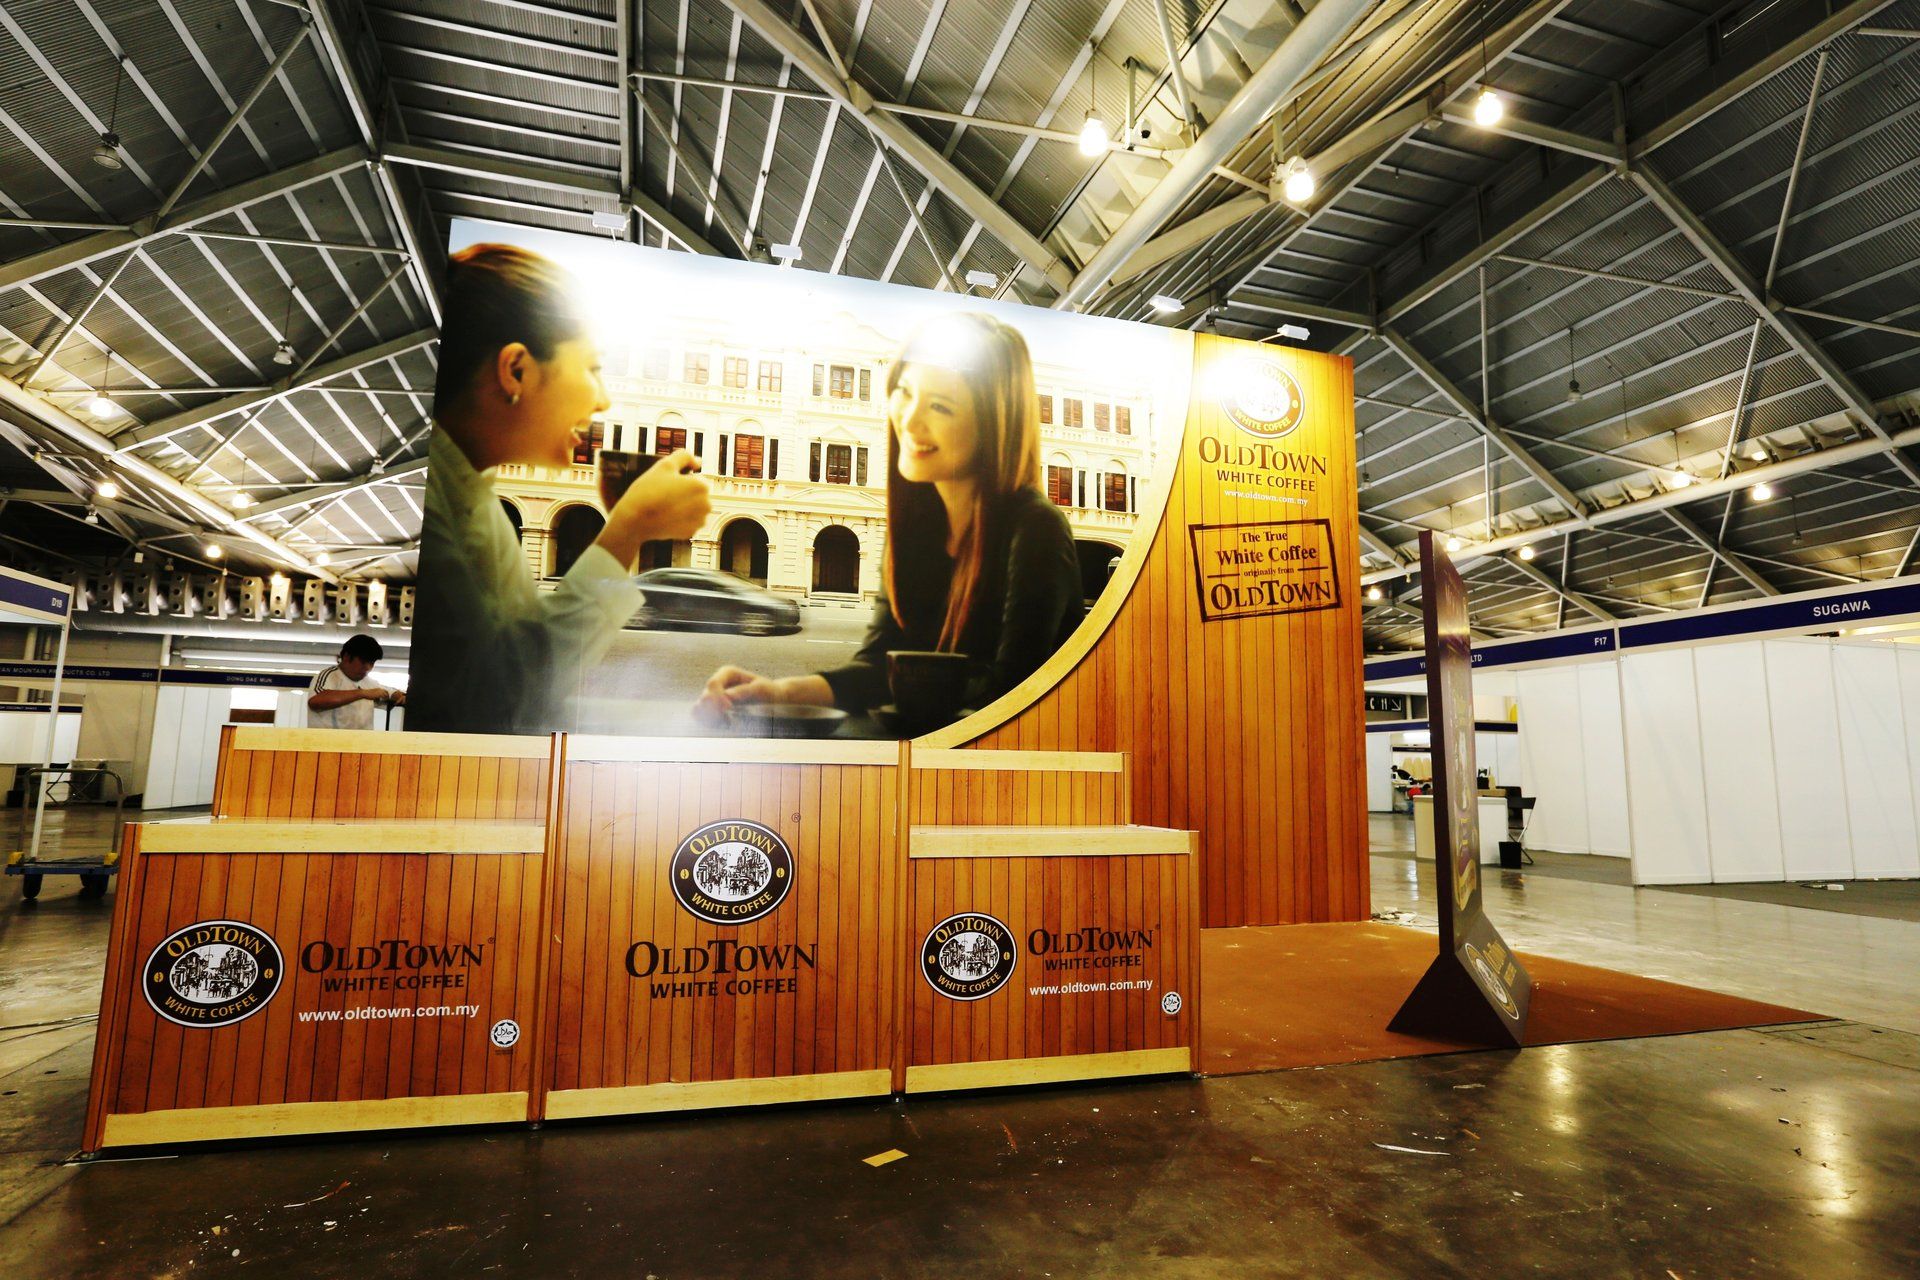 Oldtown Coffee @ World Food Fair 2016. Booth designed and built by Essential Global Fairs.